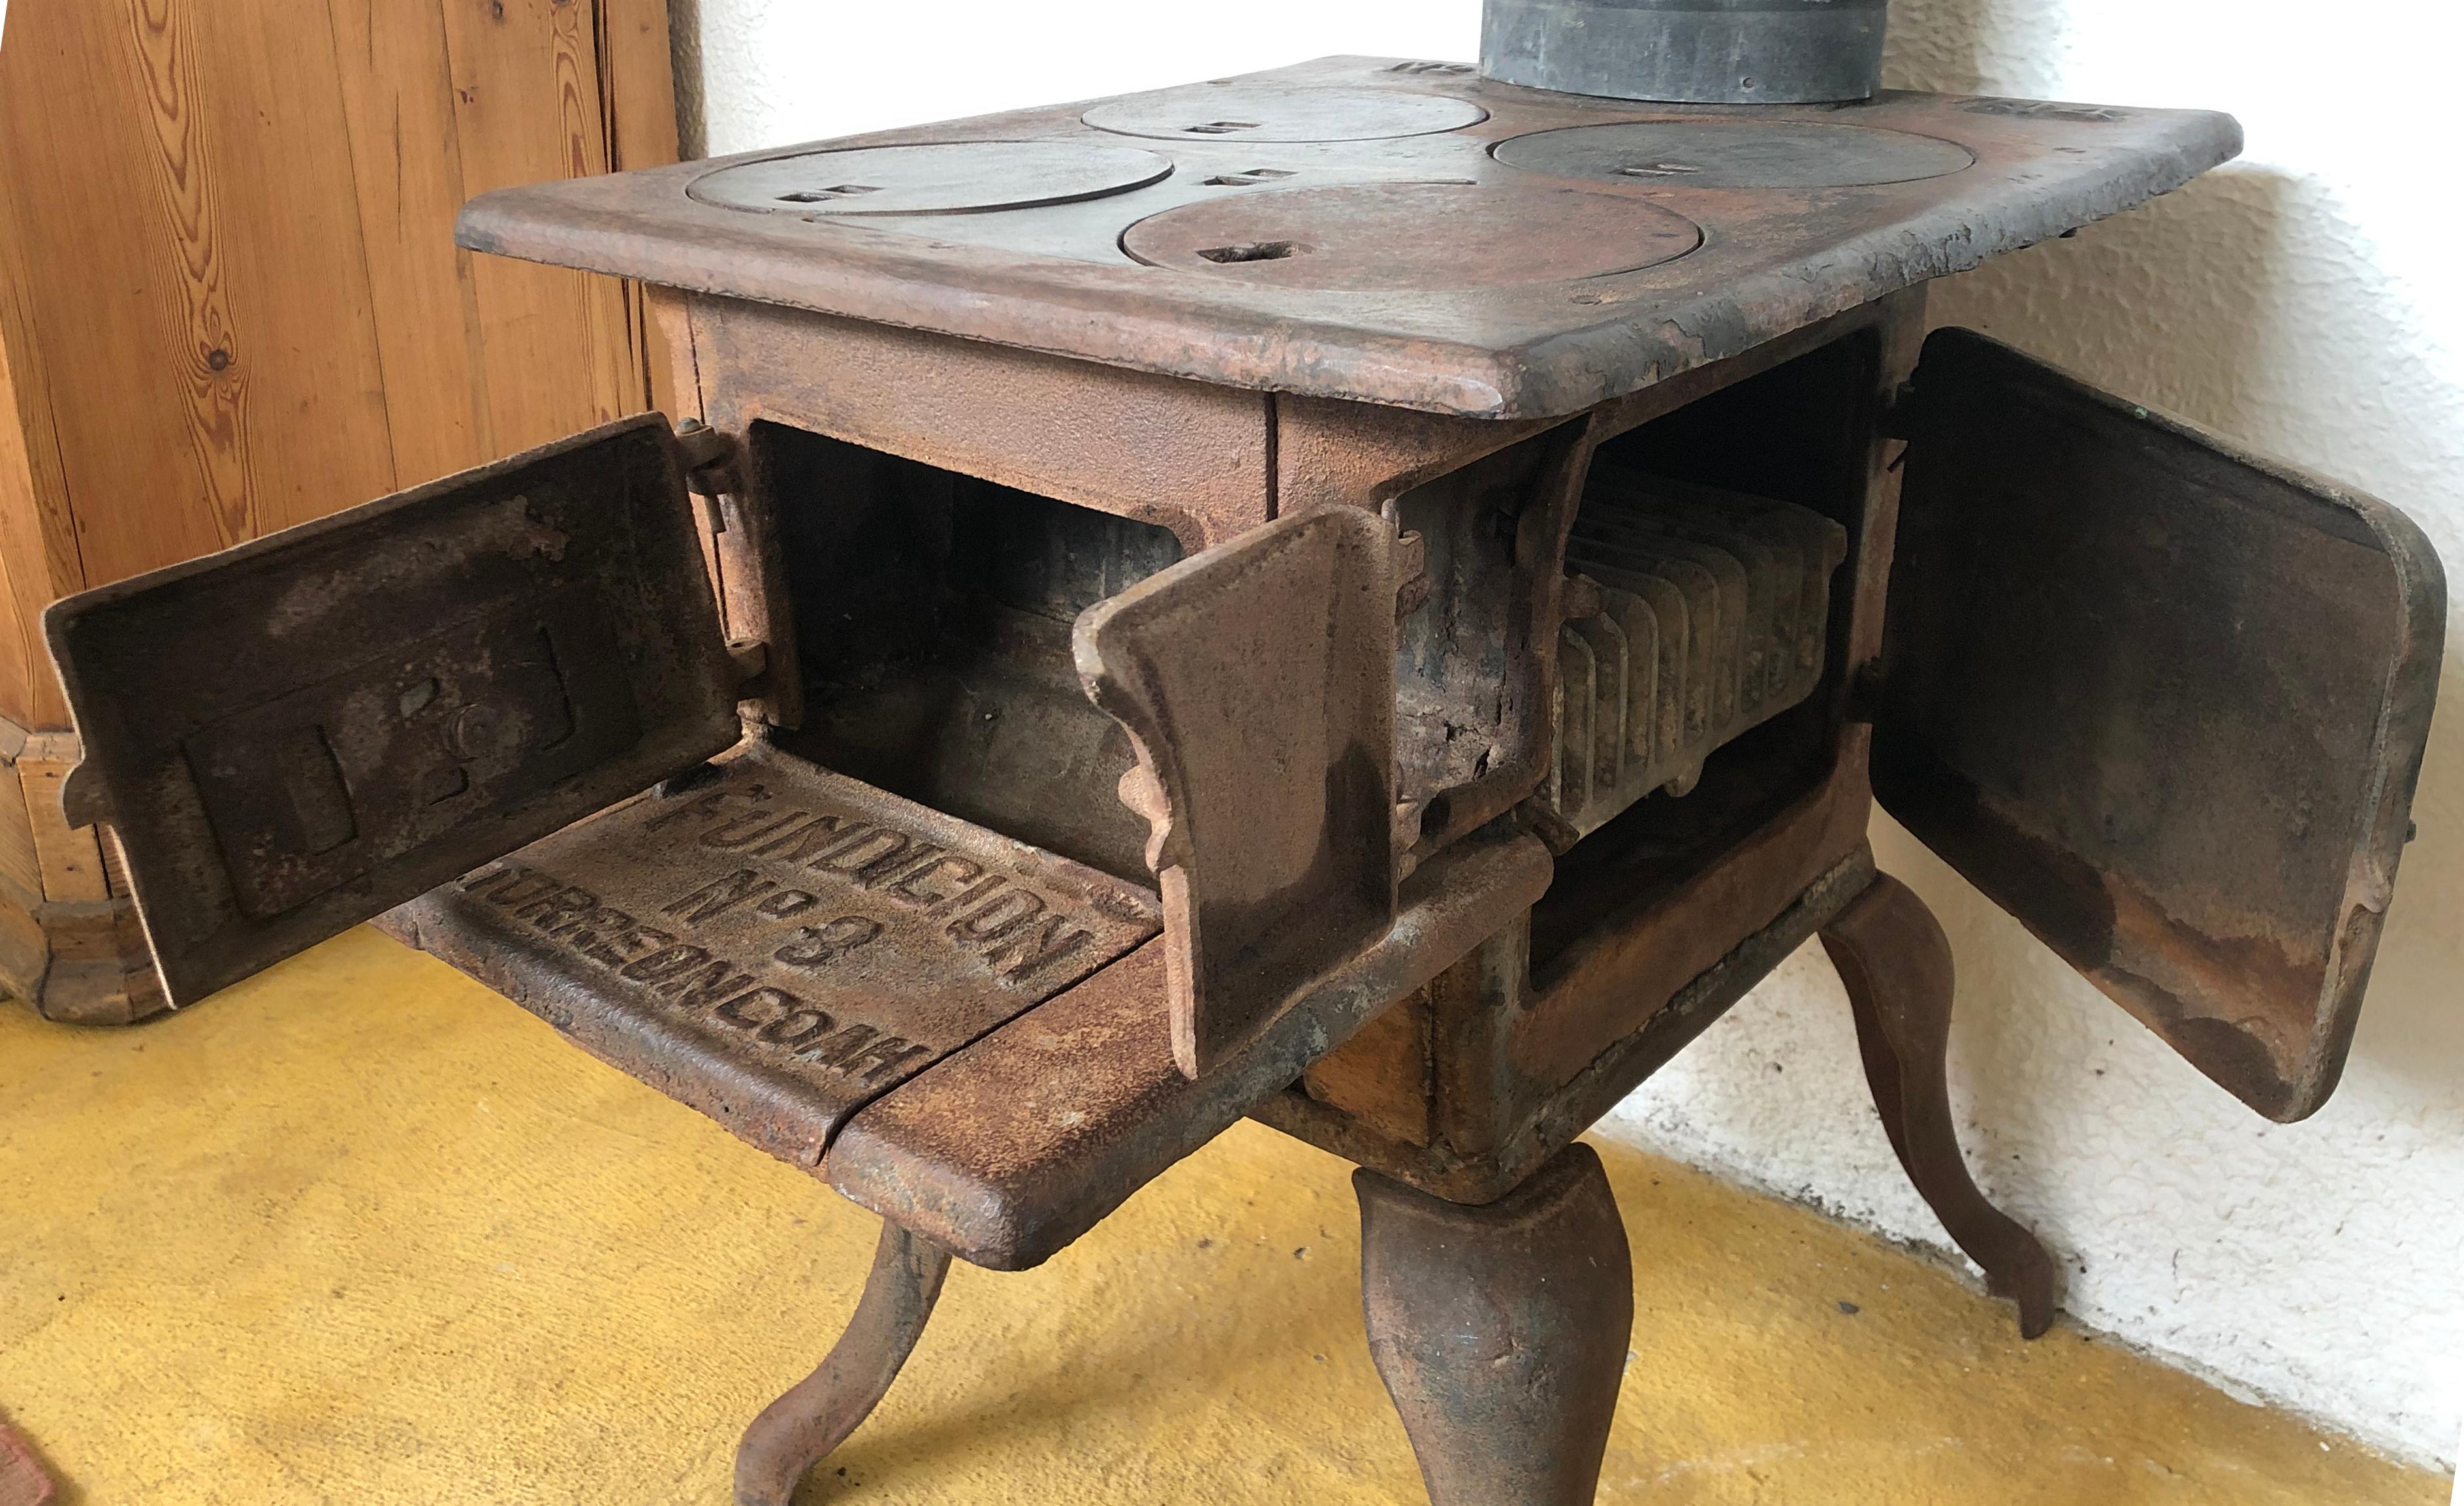 Rustic Early 20th Century Cast Iron Stove Found in Western México